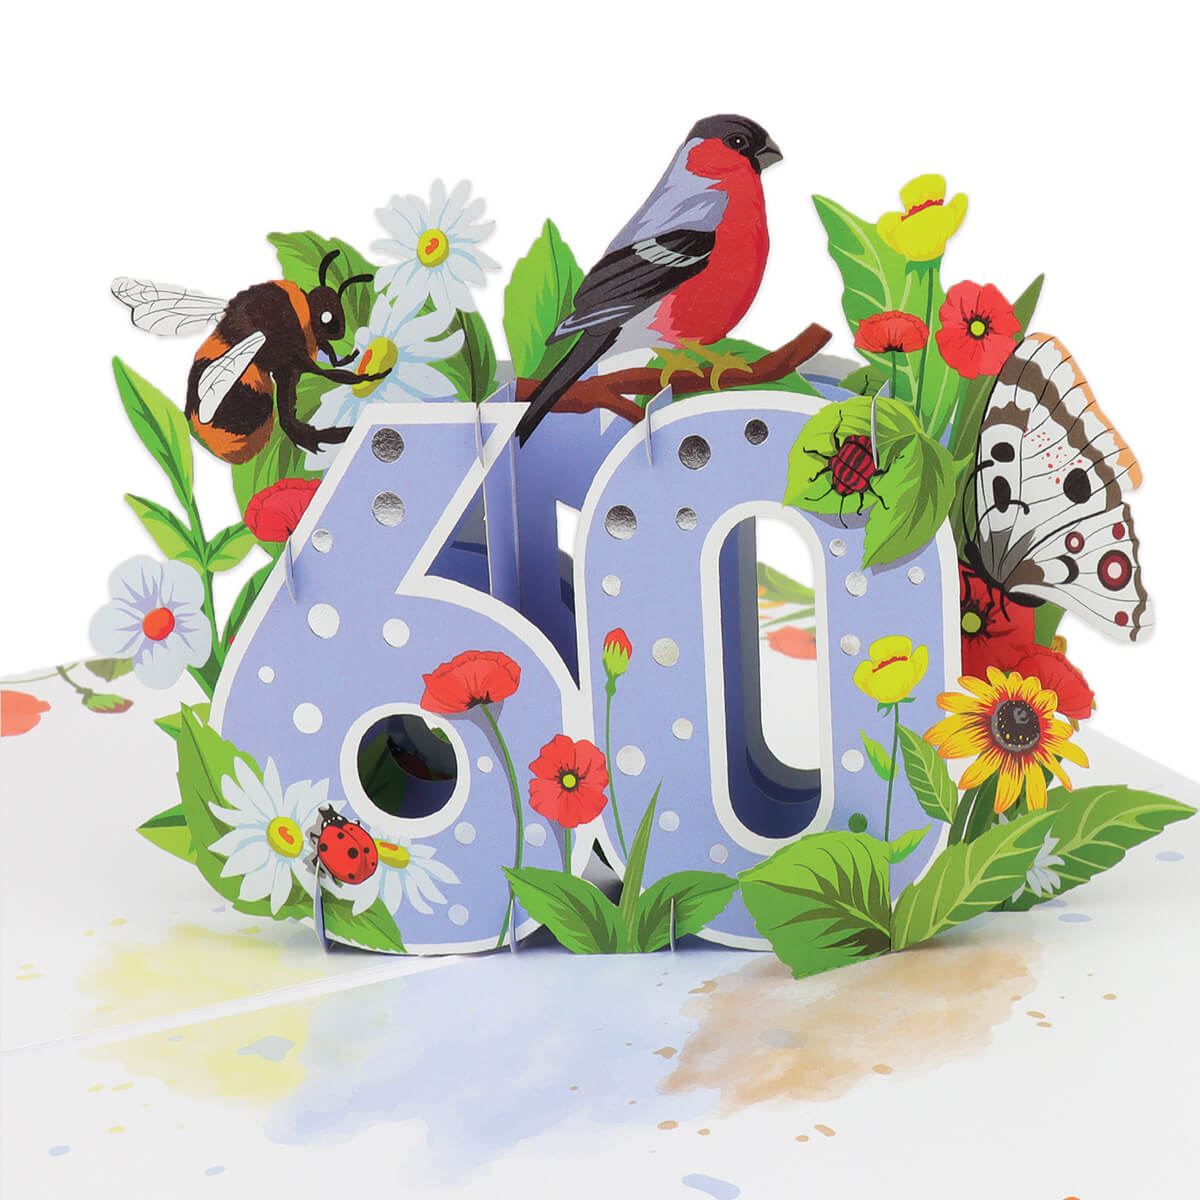 close up image of 60th birthday pop up card, soft blue with foiled silver dots on the 3D pop up 60, surrounded by butterflies, birds and insects. Inspiration of the great british countryside